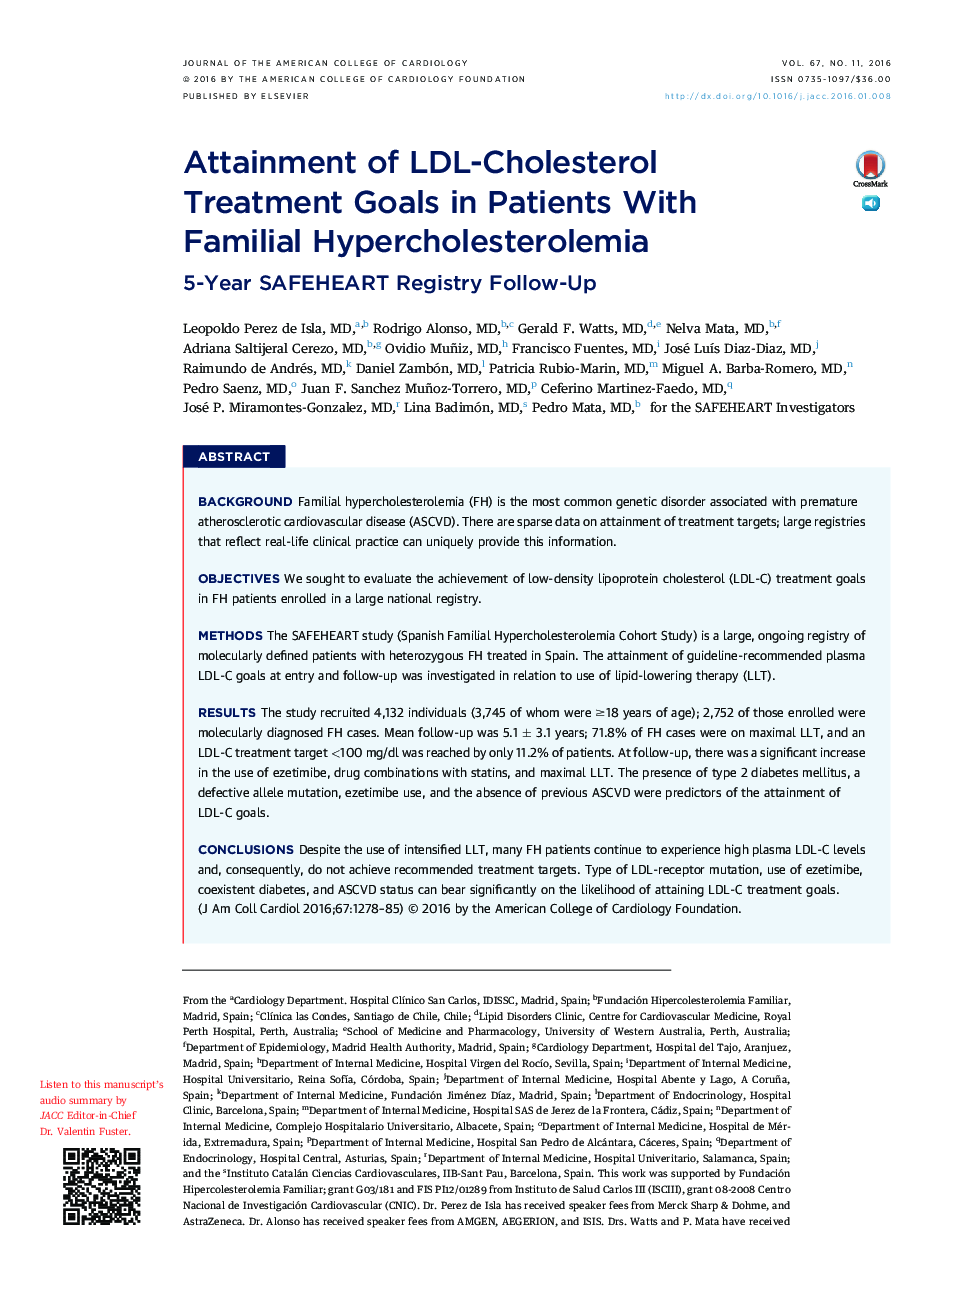 Attainment of LDL-Cholesterol TreatmentÂ Goals in Patients With FamilialÂ Hypercholesterolemia: 5-Year SAFEHEARTÂ Registry Follow-Up